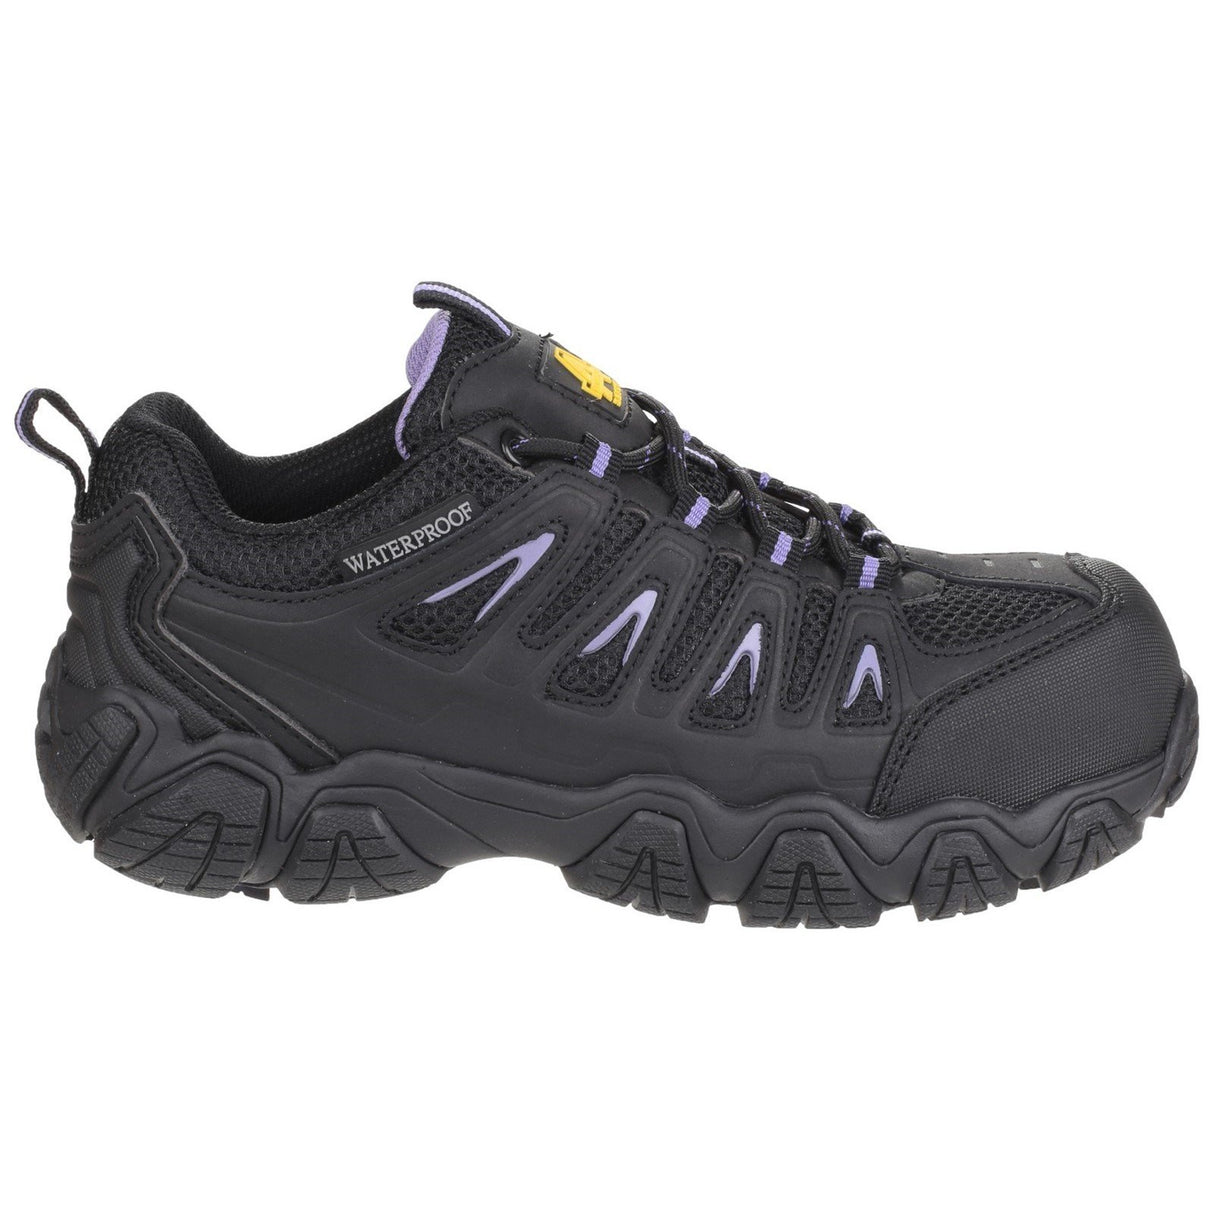 Amblers Safety Waterproof Non-Metal Ladies Safety Trainers